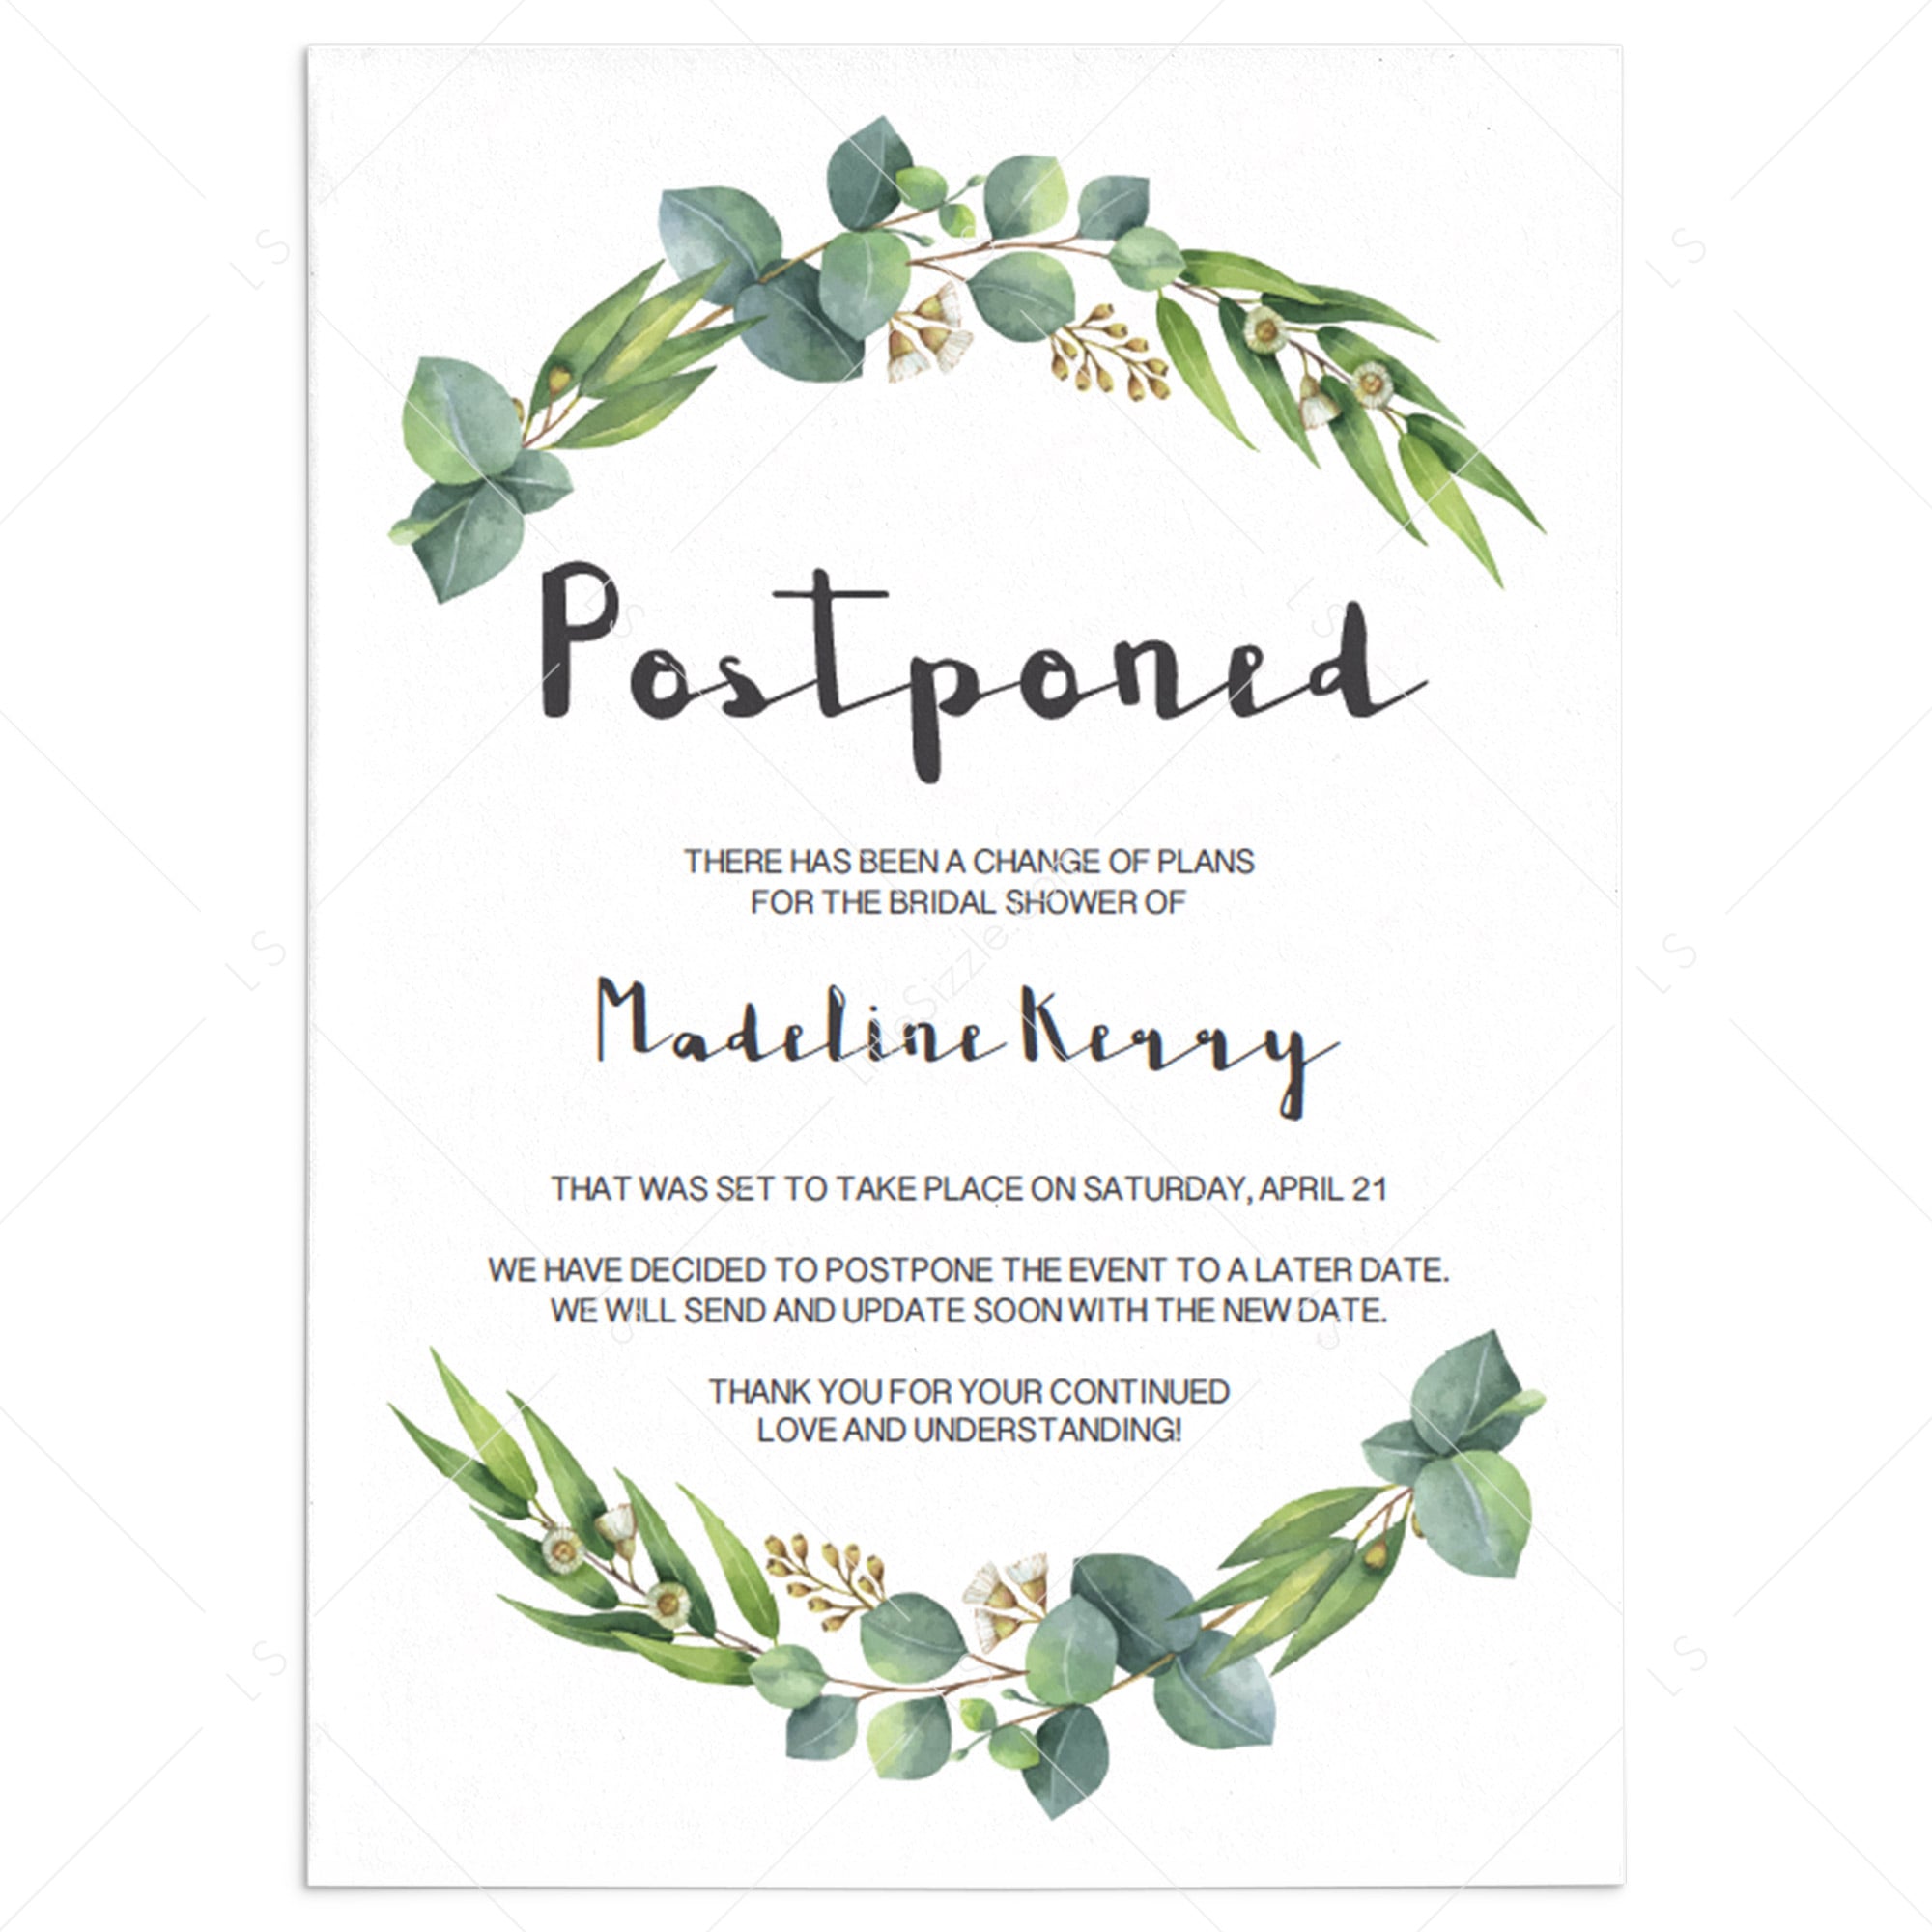 Postponed Wedding Shower Announcement Template Greenery by LittleSizzle